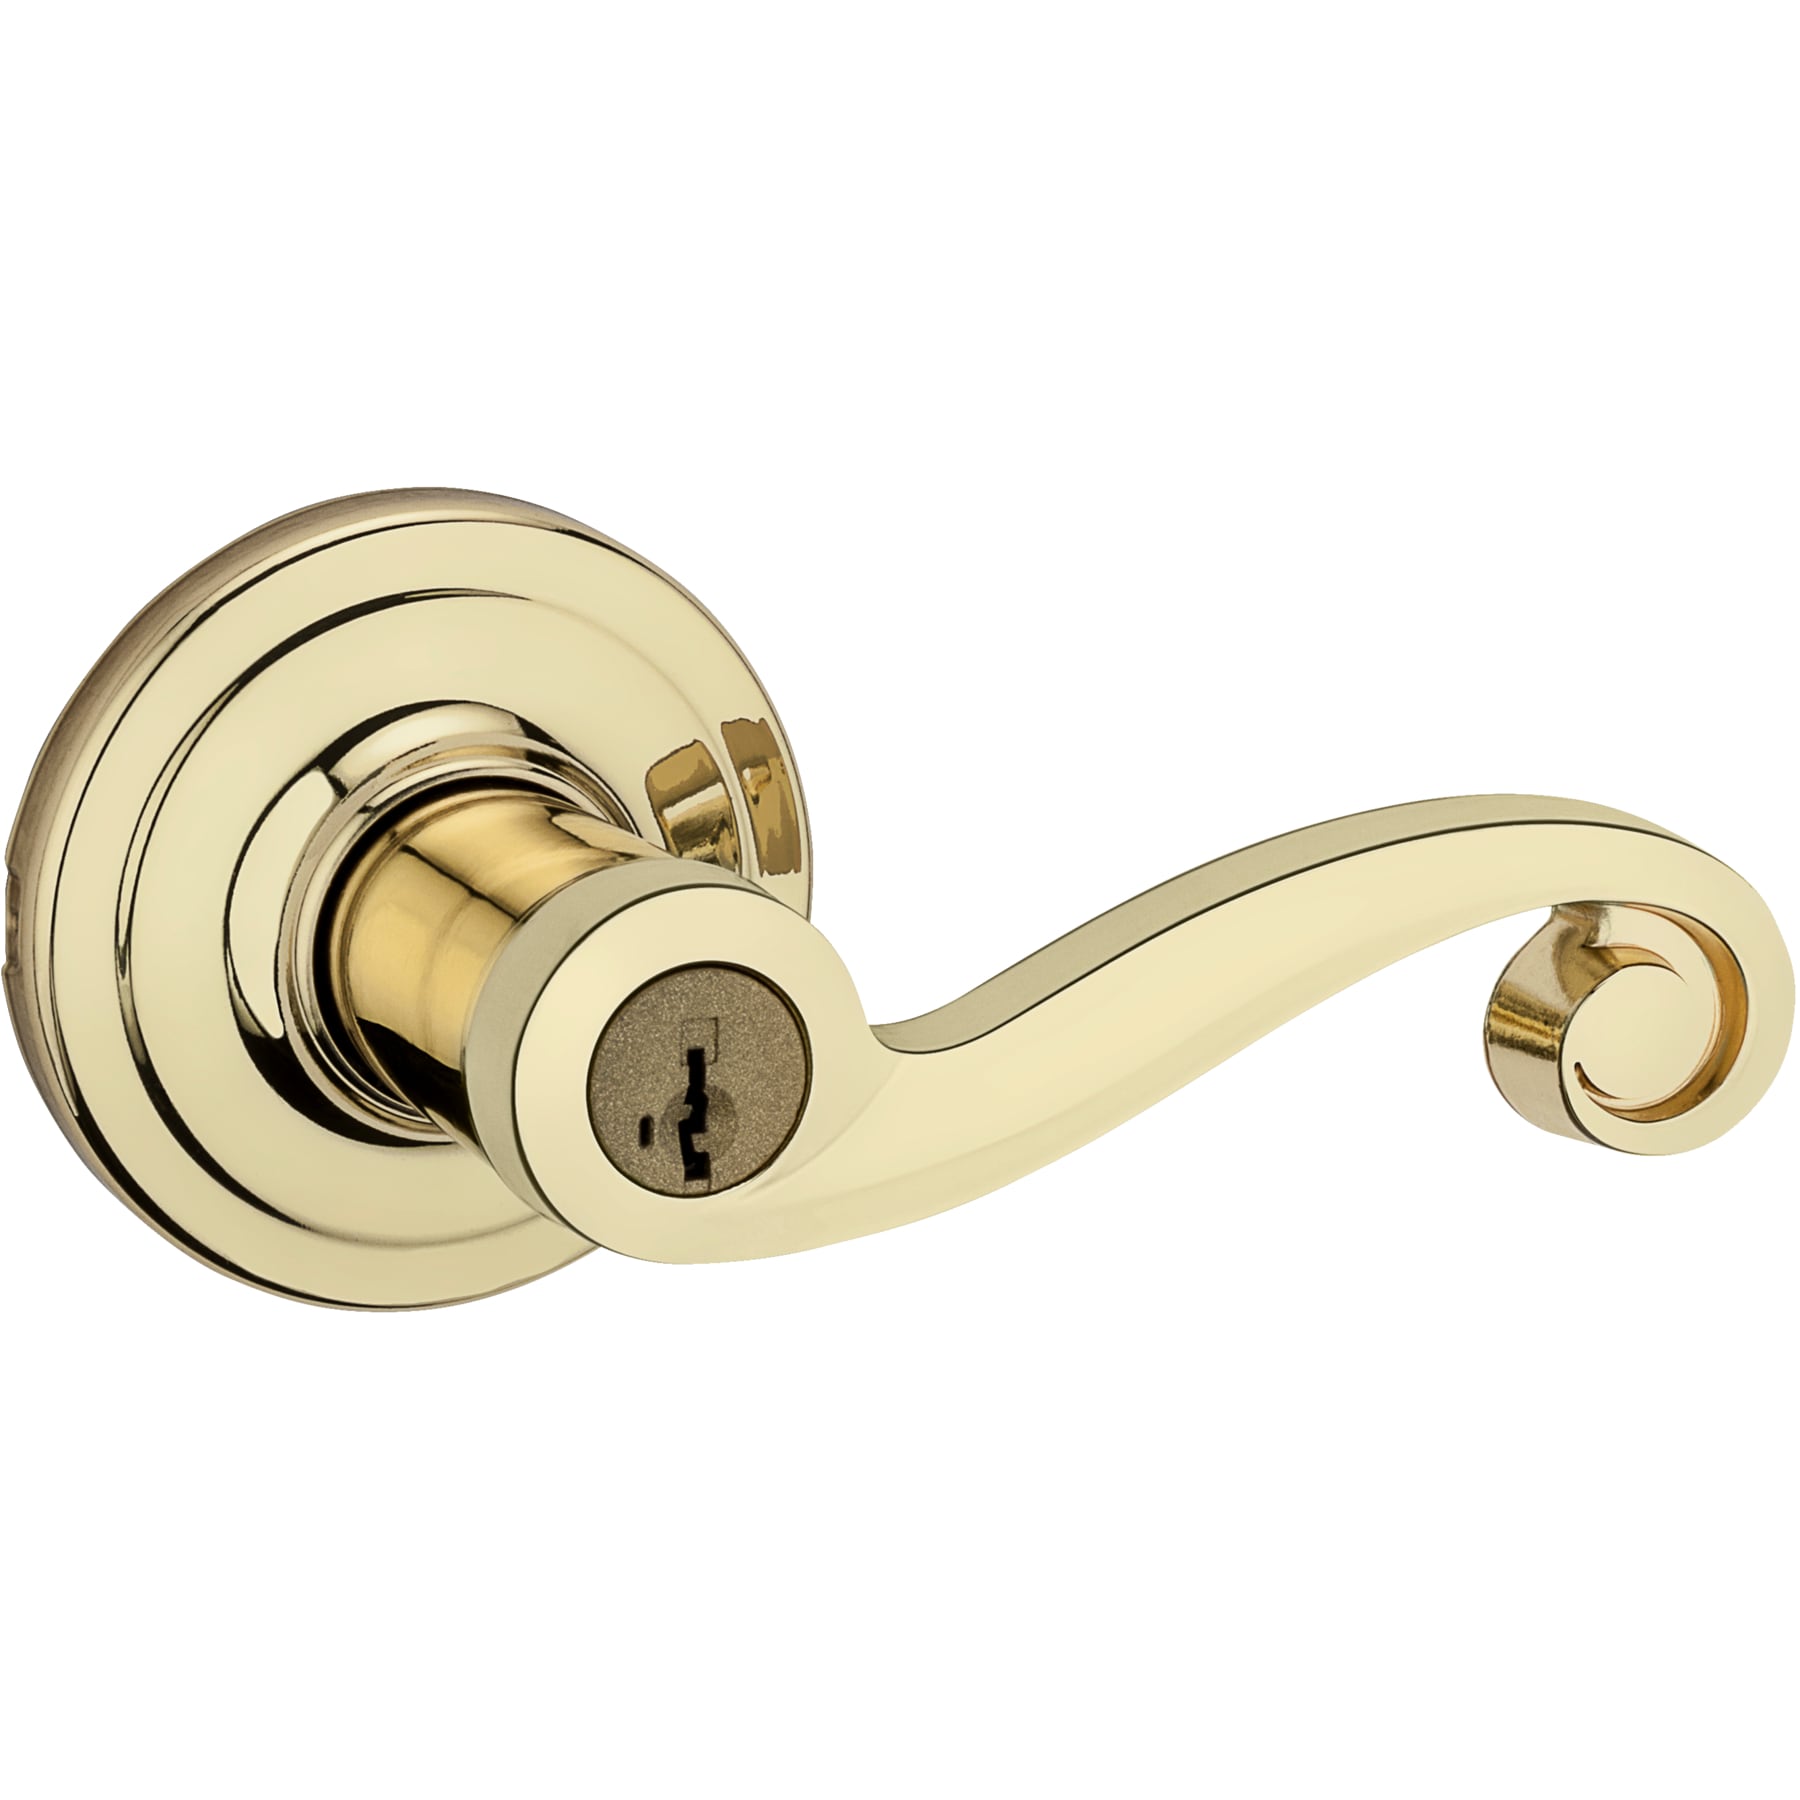 Kwikset Lido Polished Brass Exterior Keyed Entry Door Handle with